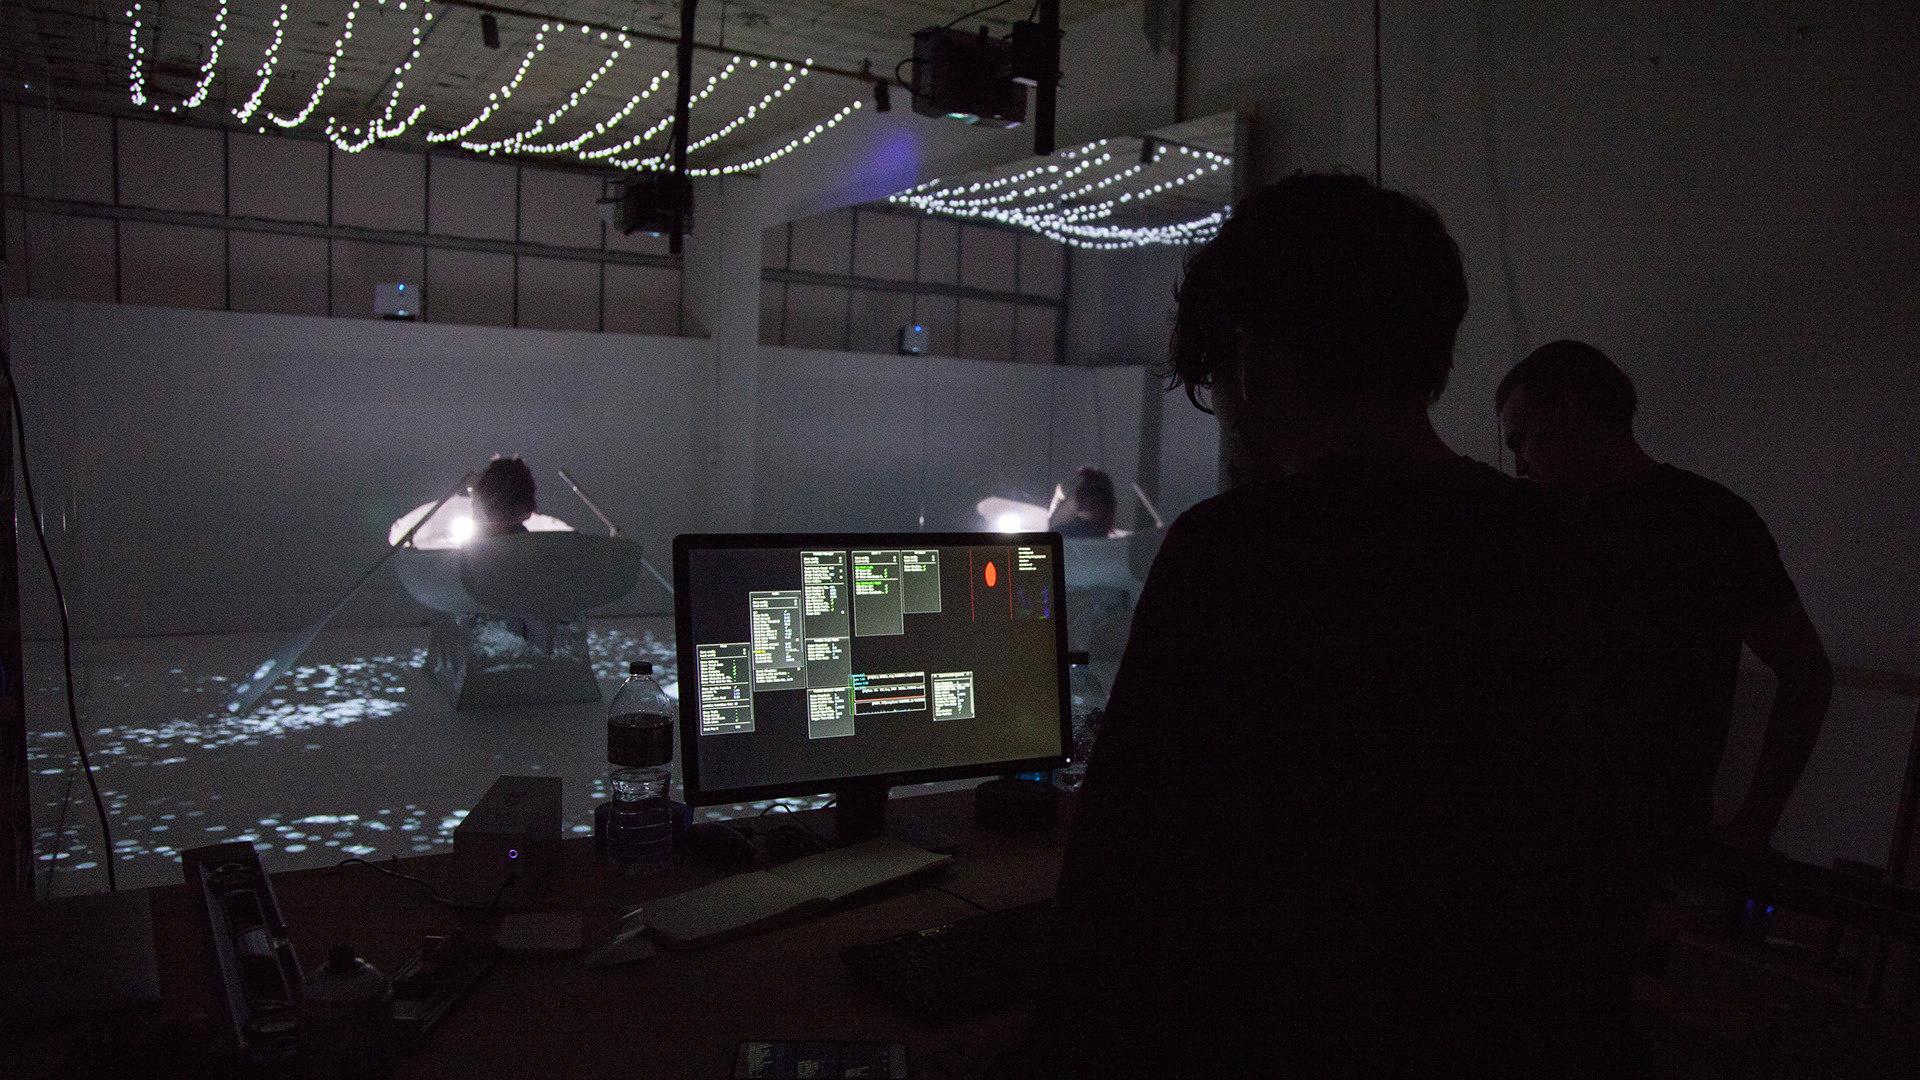 behind the scenes of interactive installation, dark room with projections and a rowboat